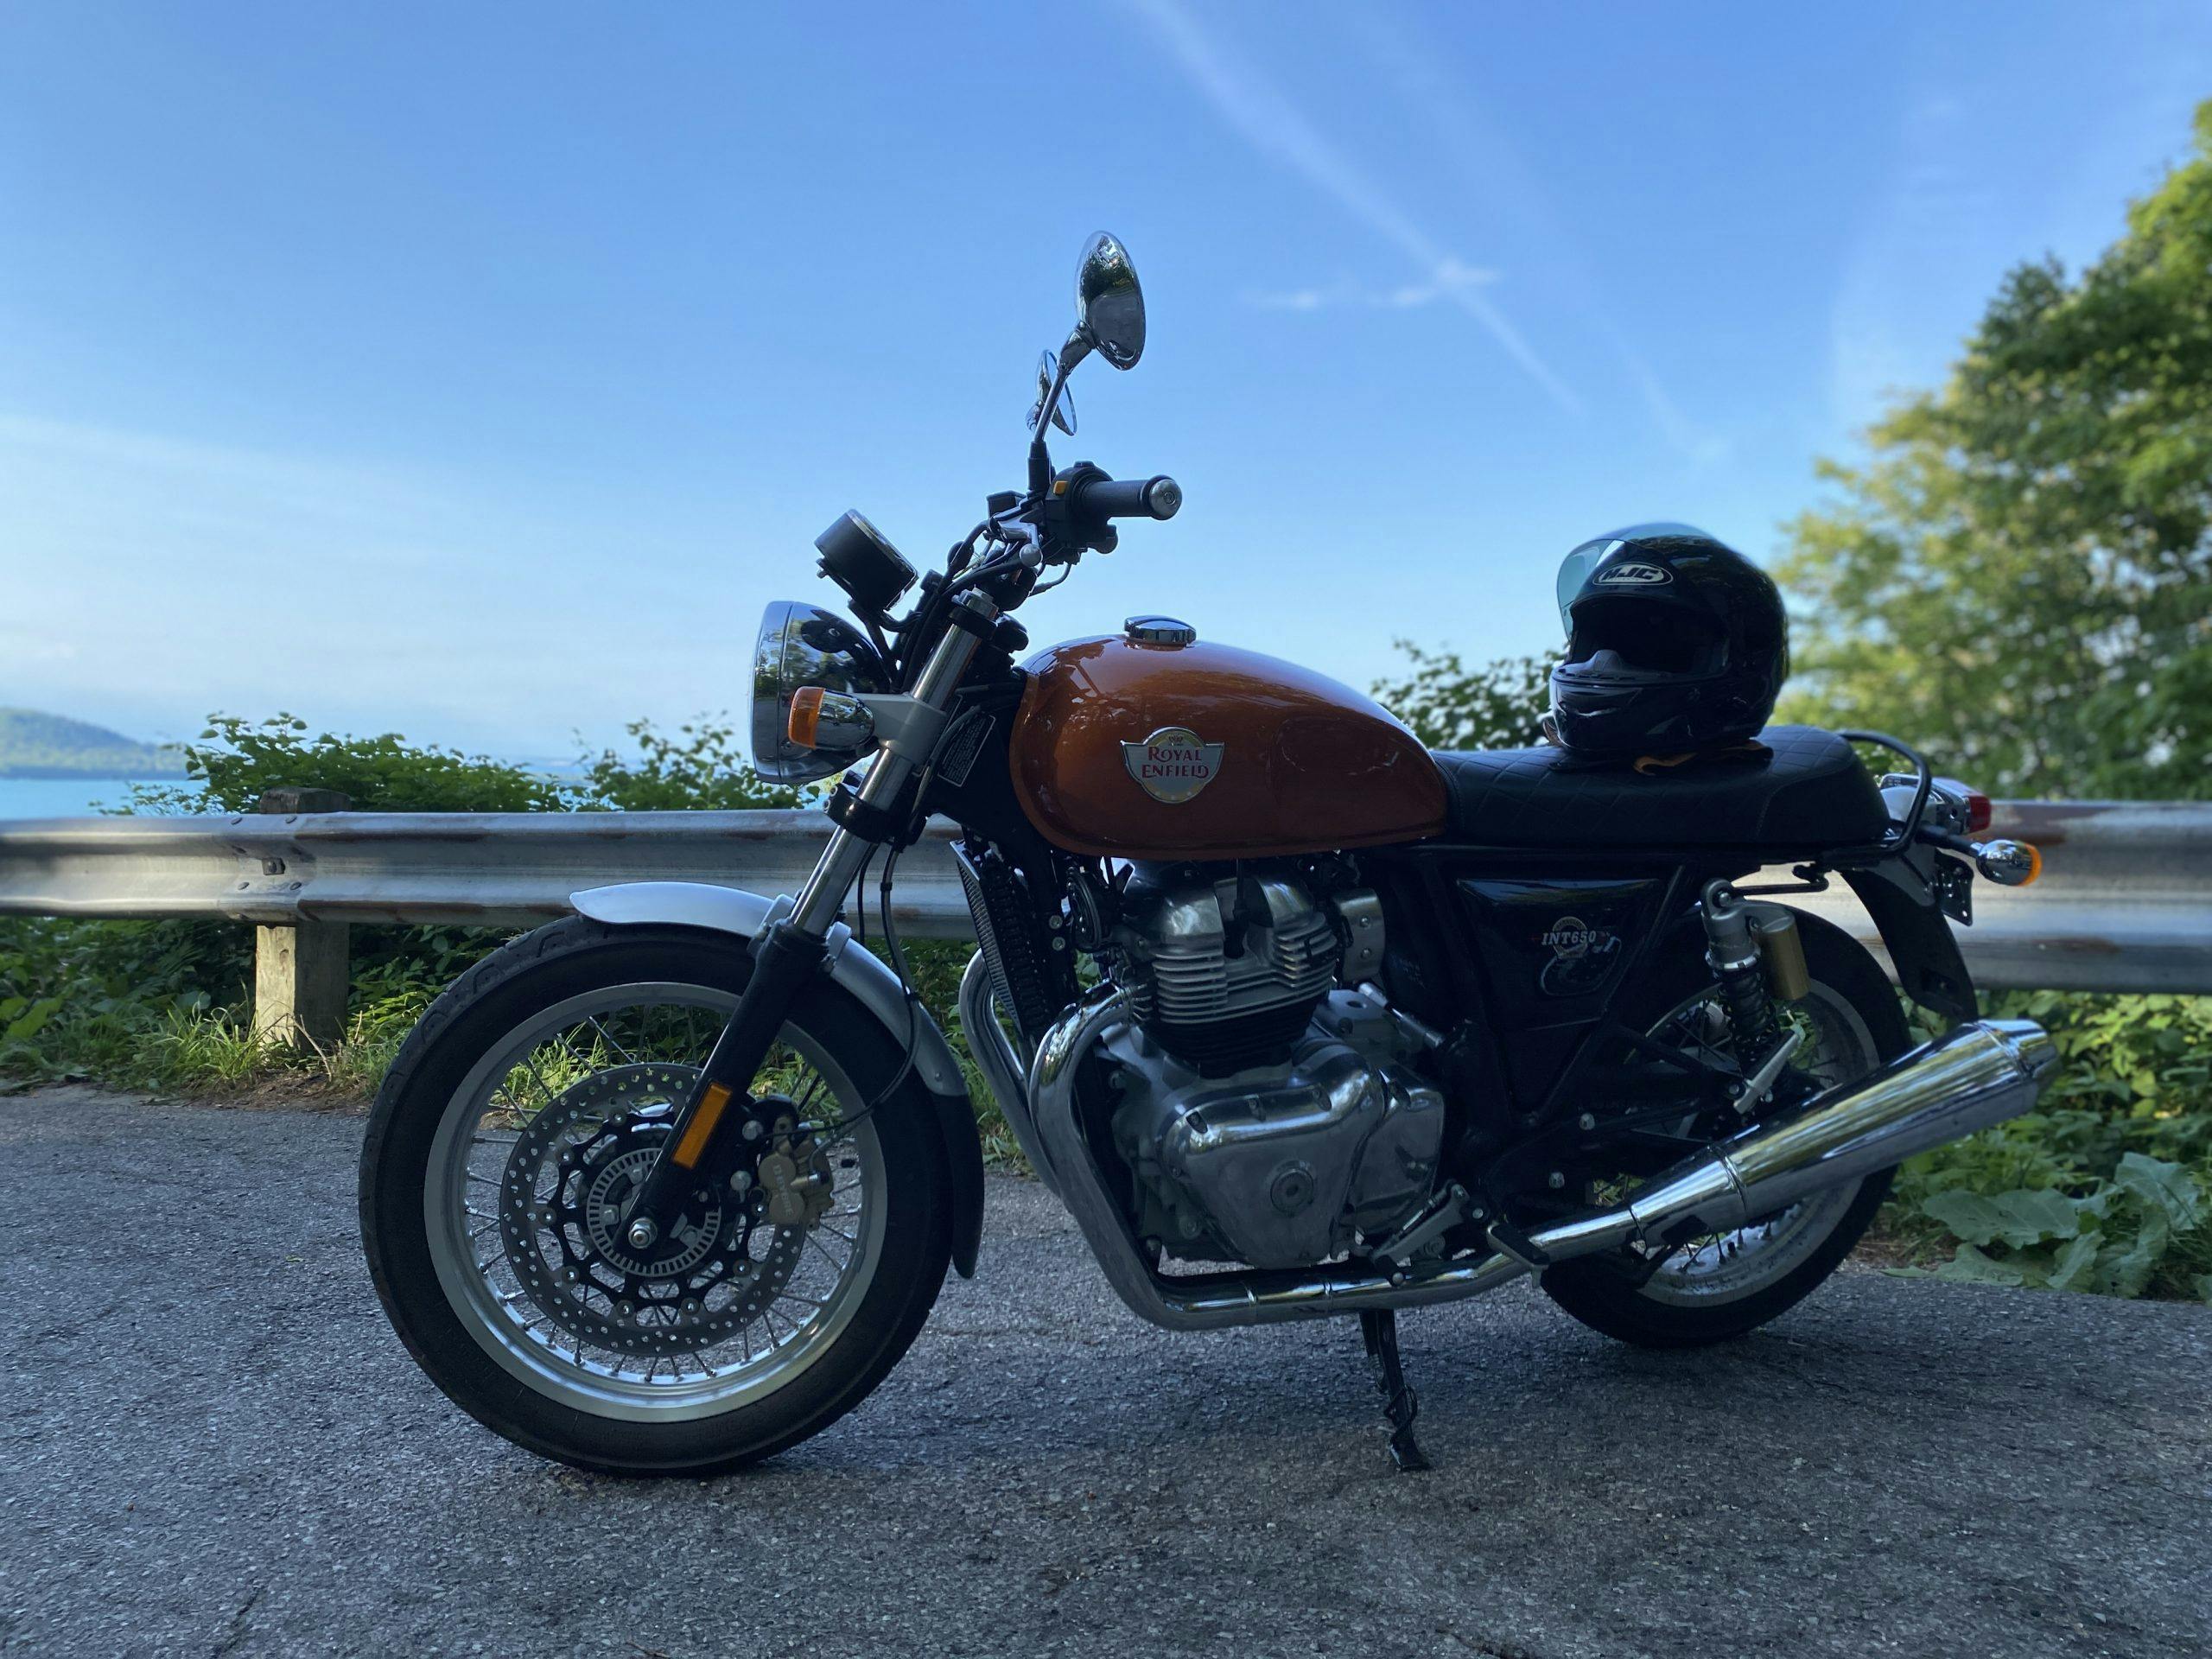 Royal Enfield INT650 at scenic overlook full bike